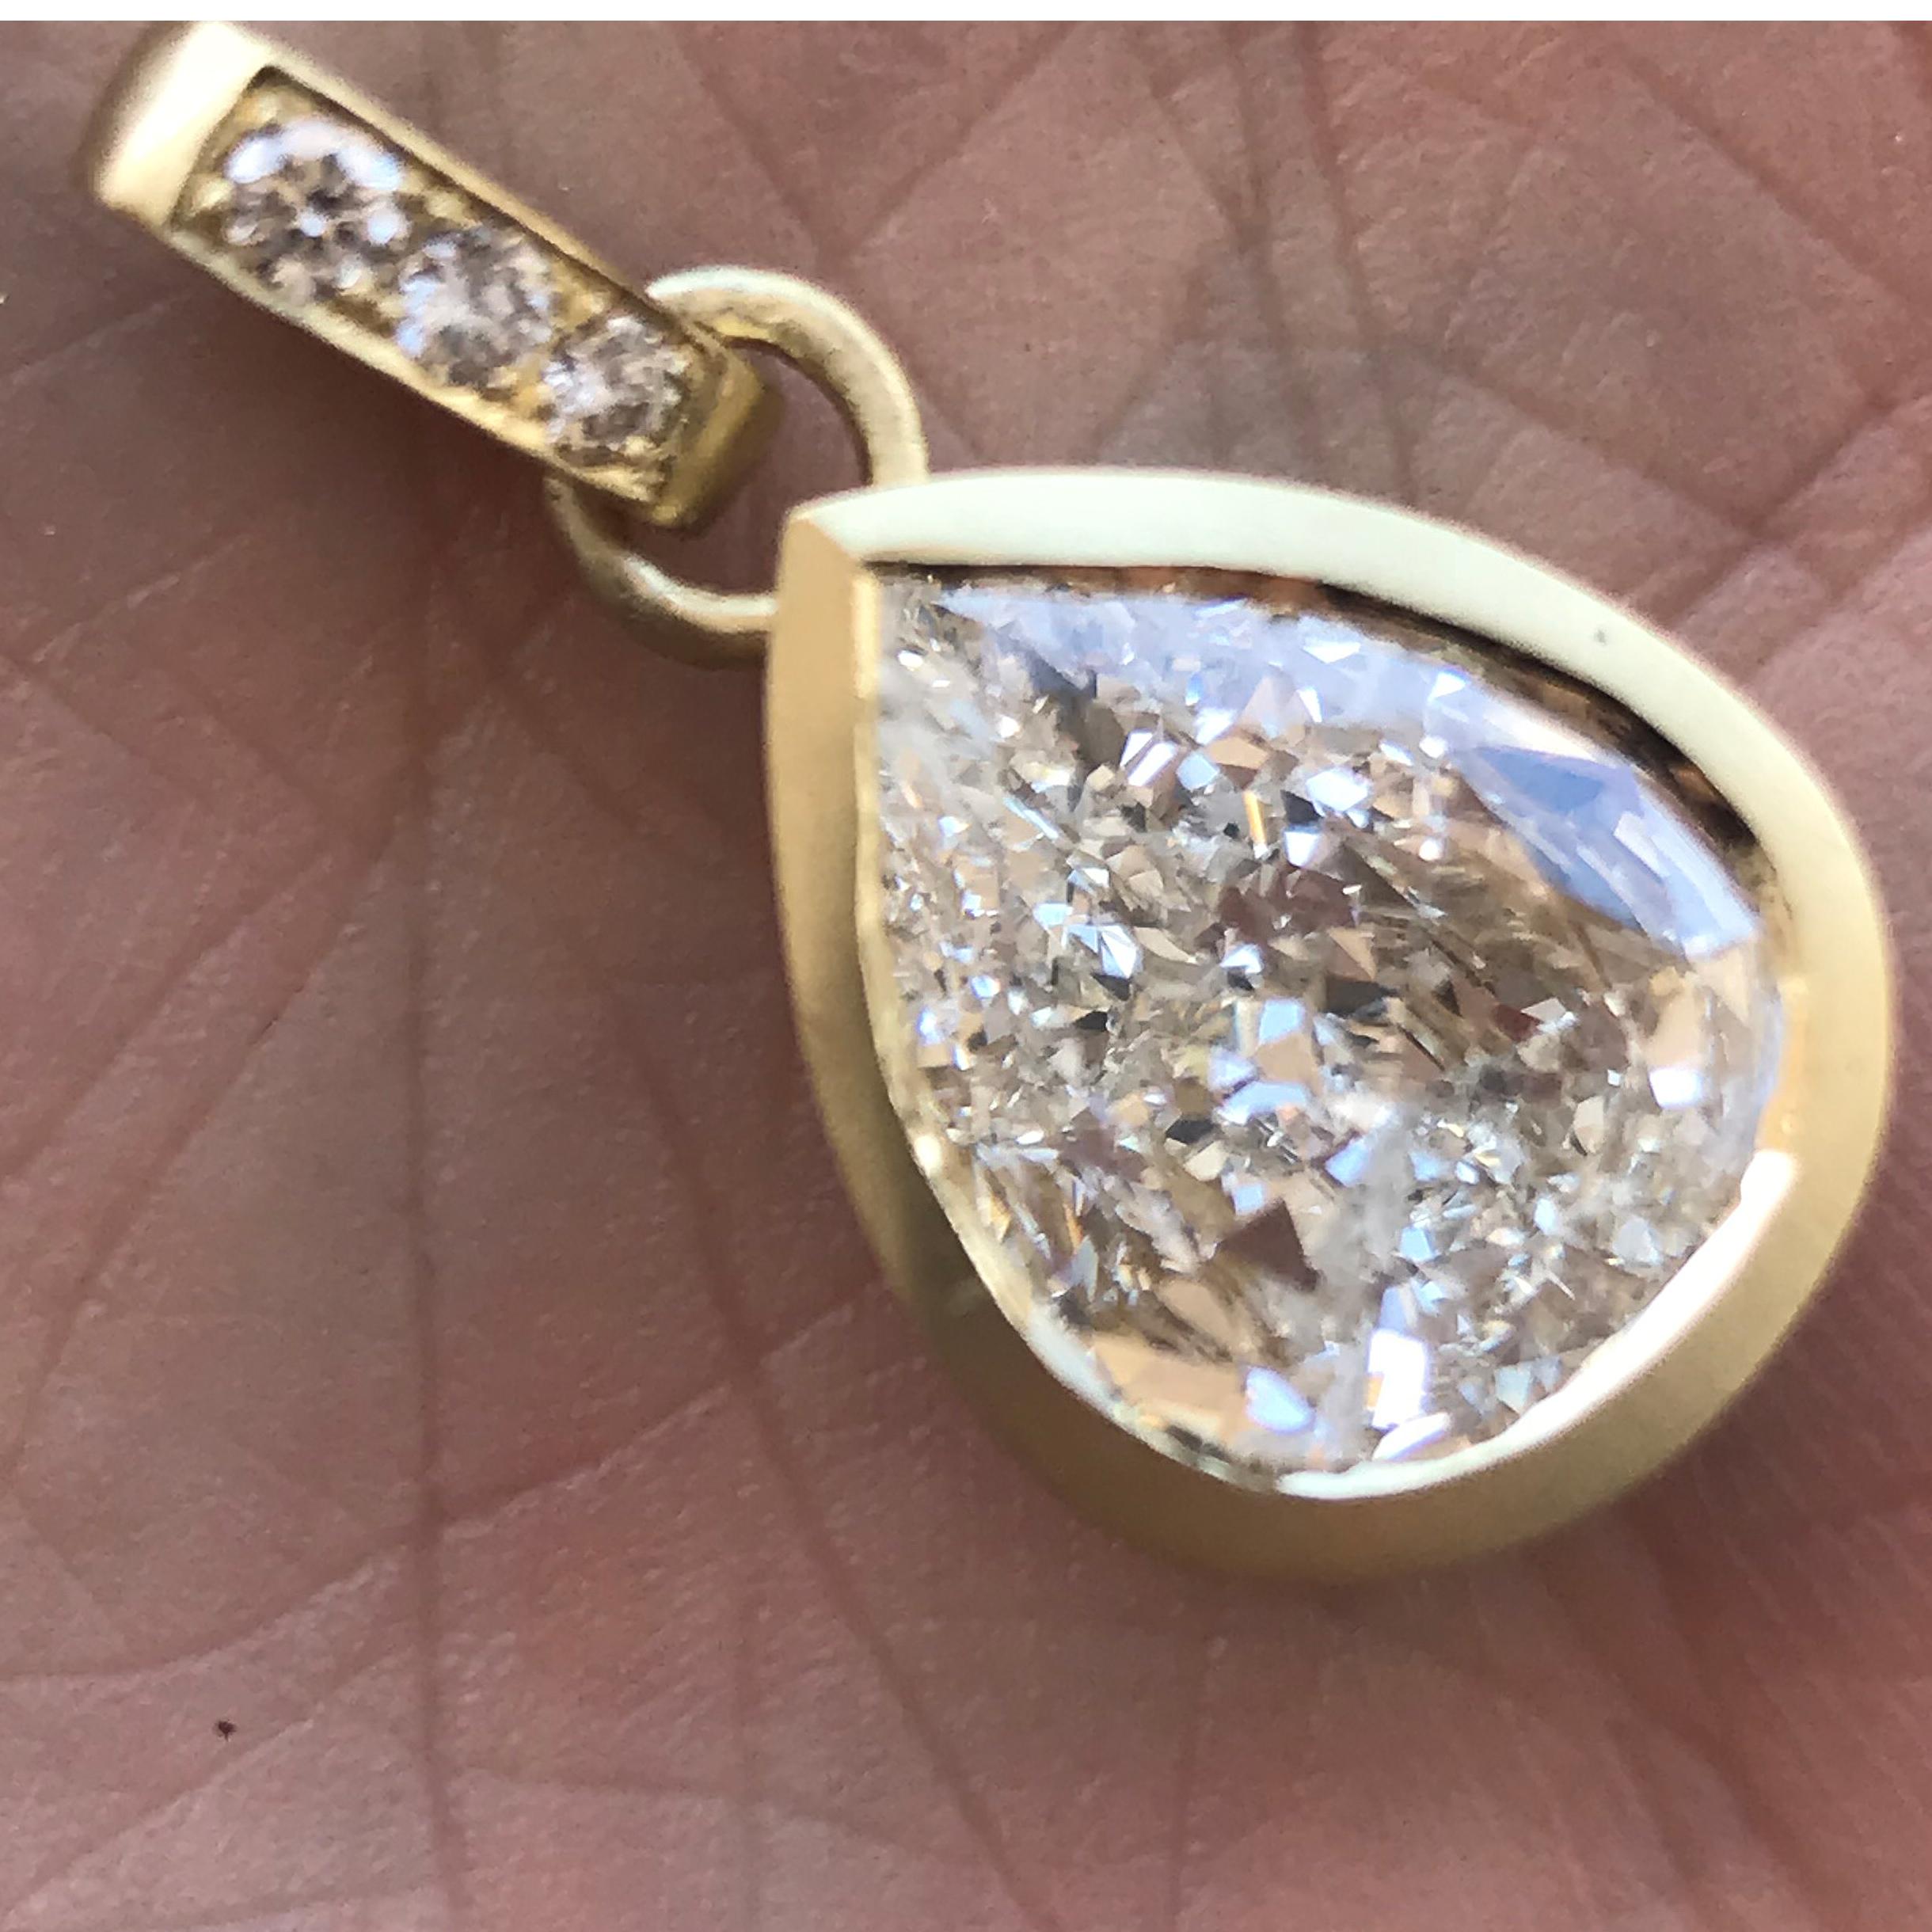 AS006-0700044

These Earrings will be made to order and take approximately 1-3 weeks from customers final design approval. If you need a sooner date let us know and we will see if we can accommodate you. Carat weight and color and clarity of stones